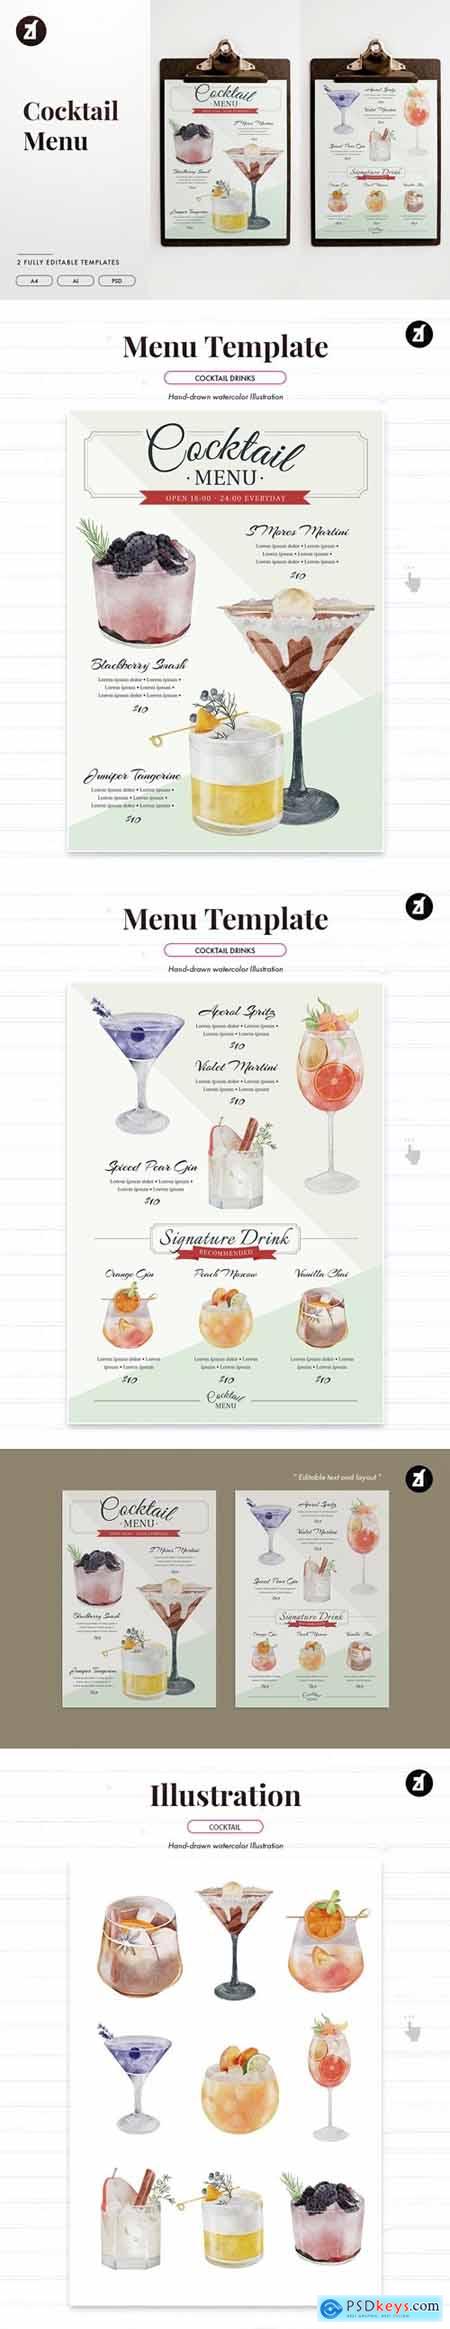 Cocktail and drinks menu template